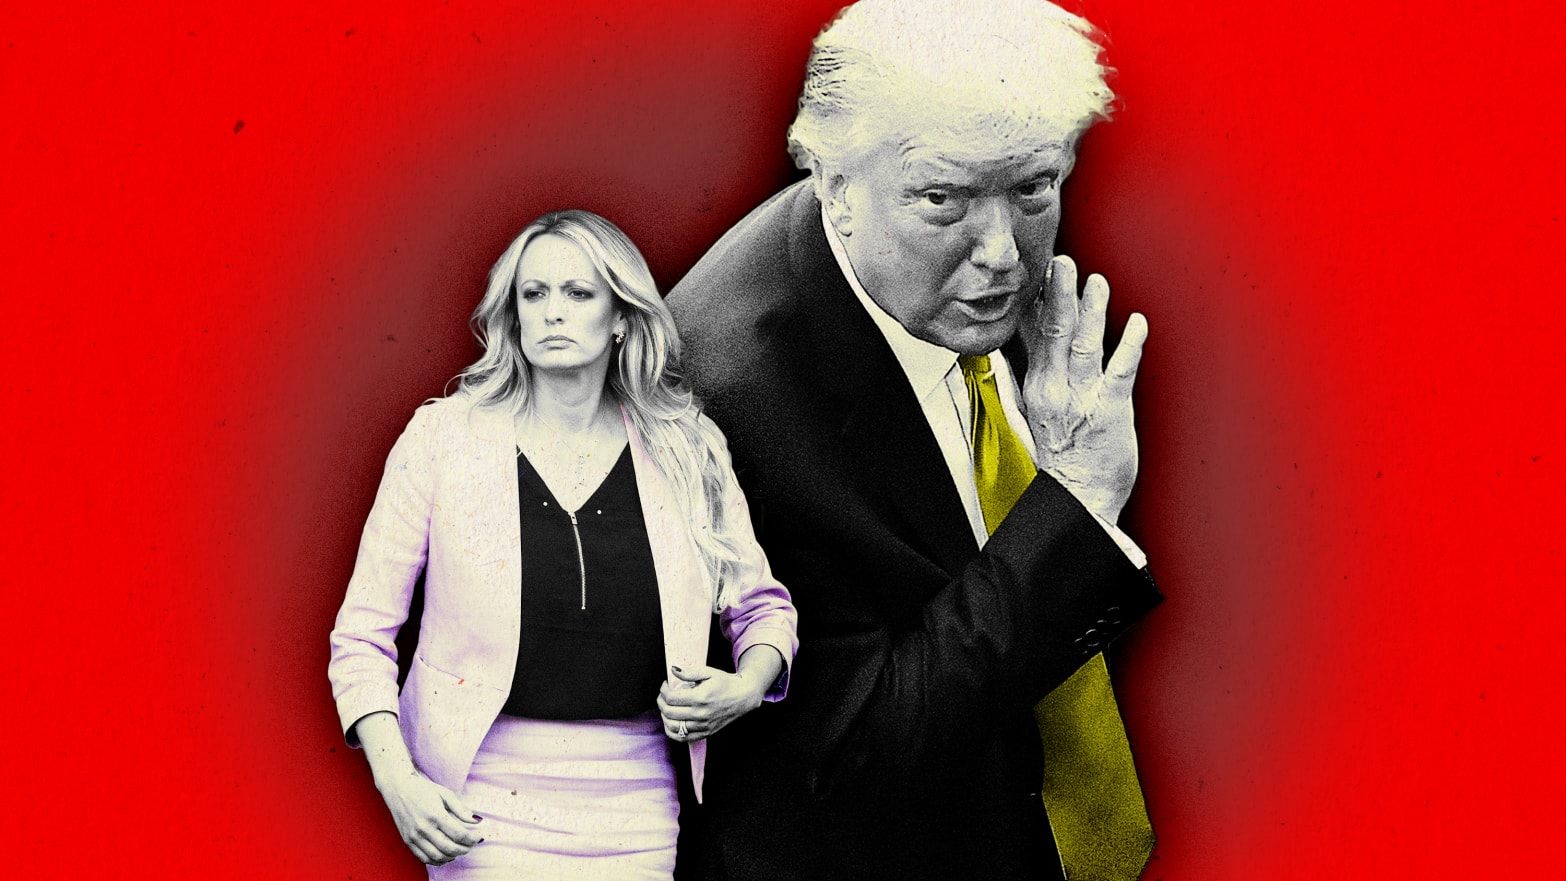 A photo illustration of Stormy Daniels and Donald Trump.